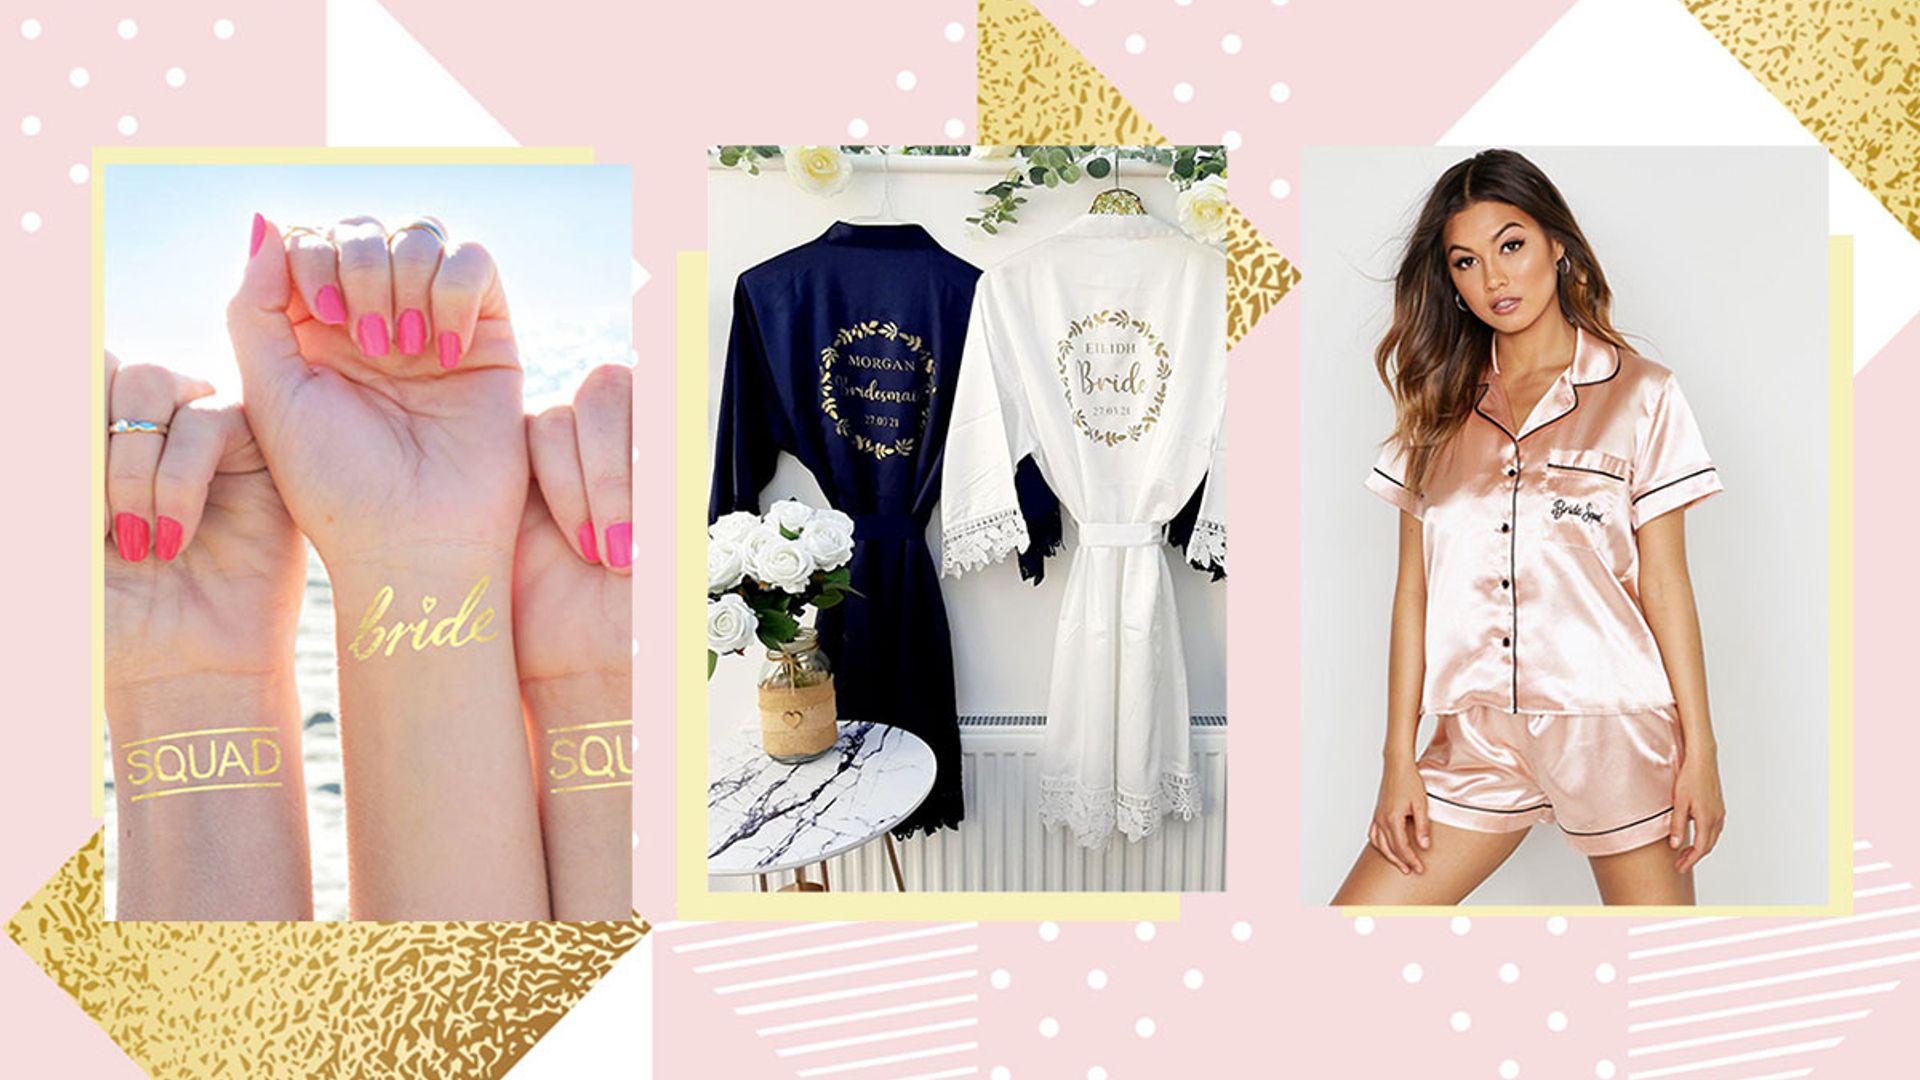 12 Bride Tribe accessories for a hen party in 2021: Props, personalised robes, swimsuits, sashes & more